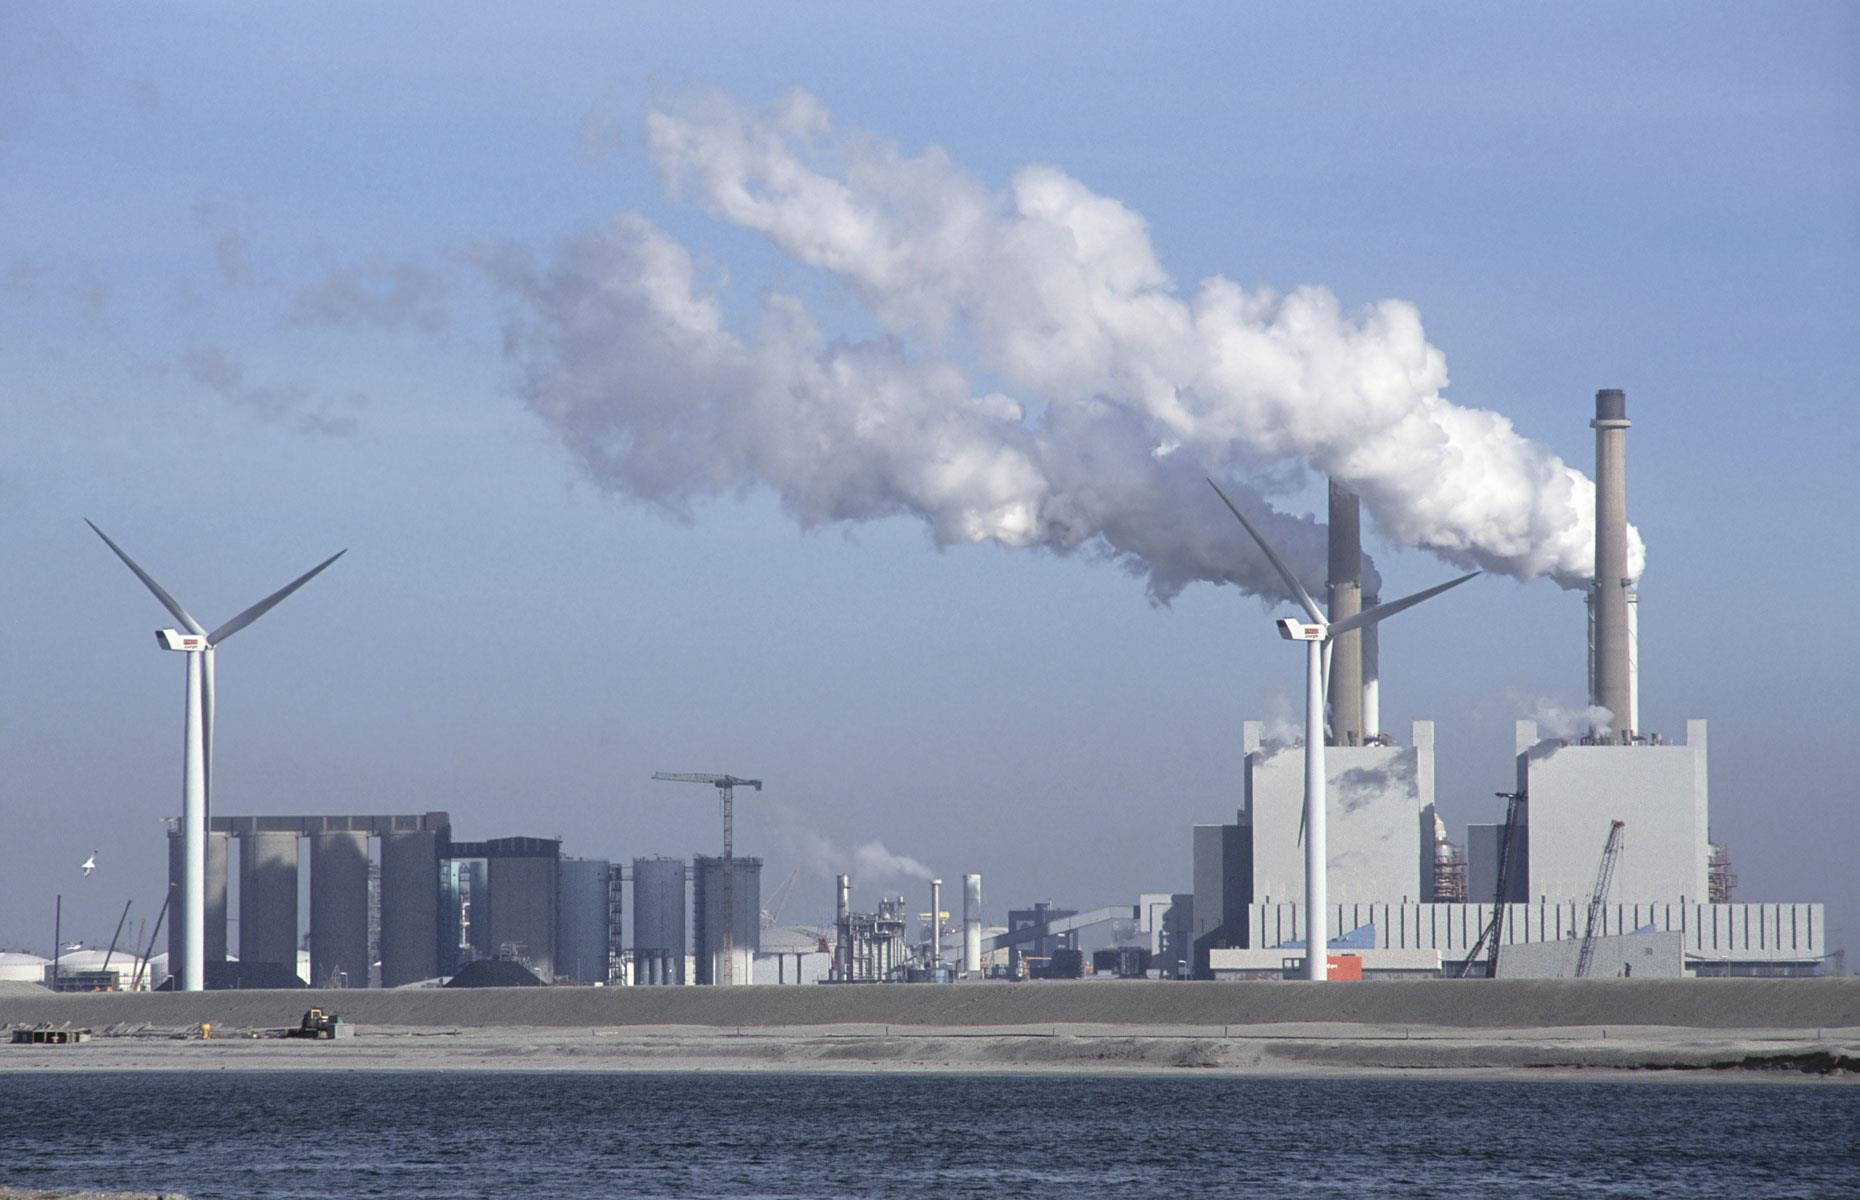 Netherlands: 86% fossil fuel reliance